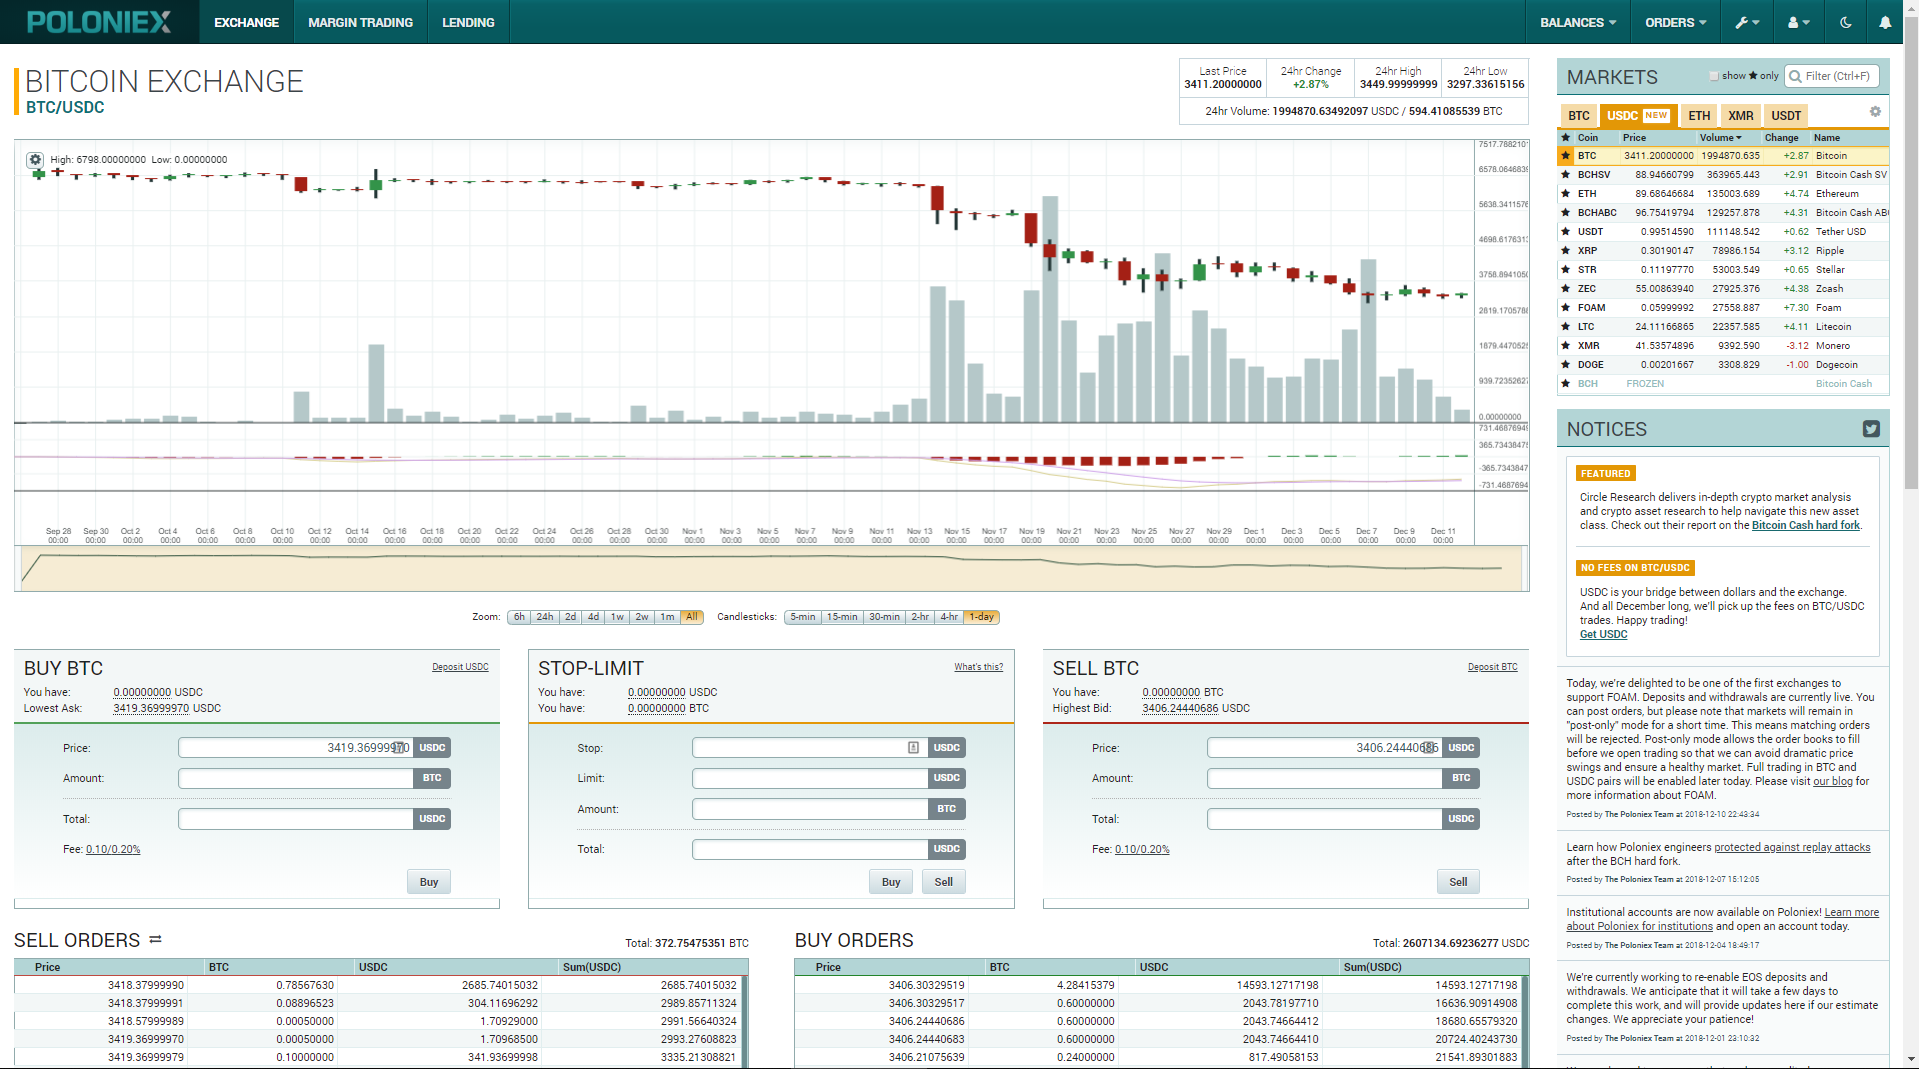 This is how Poloniex’s browser trading interface looks like 